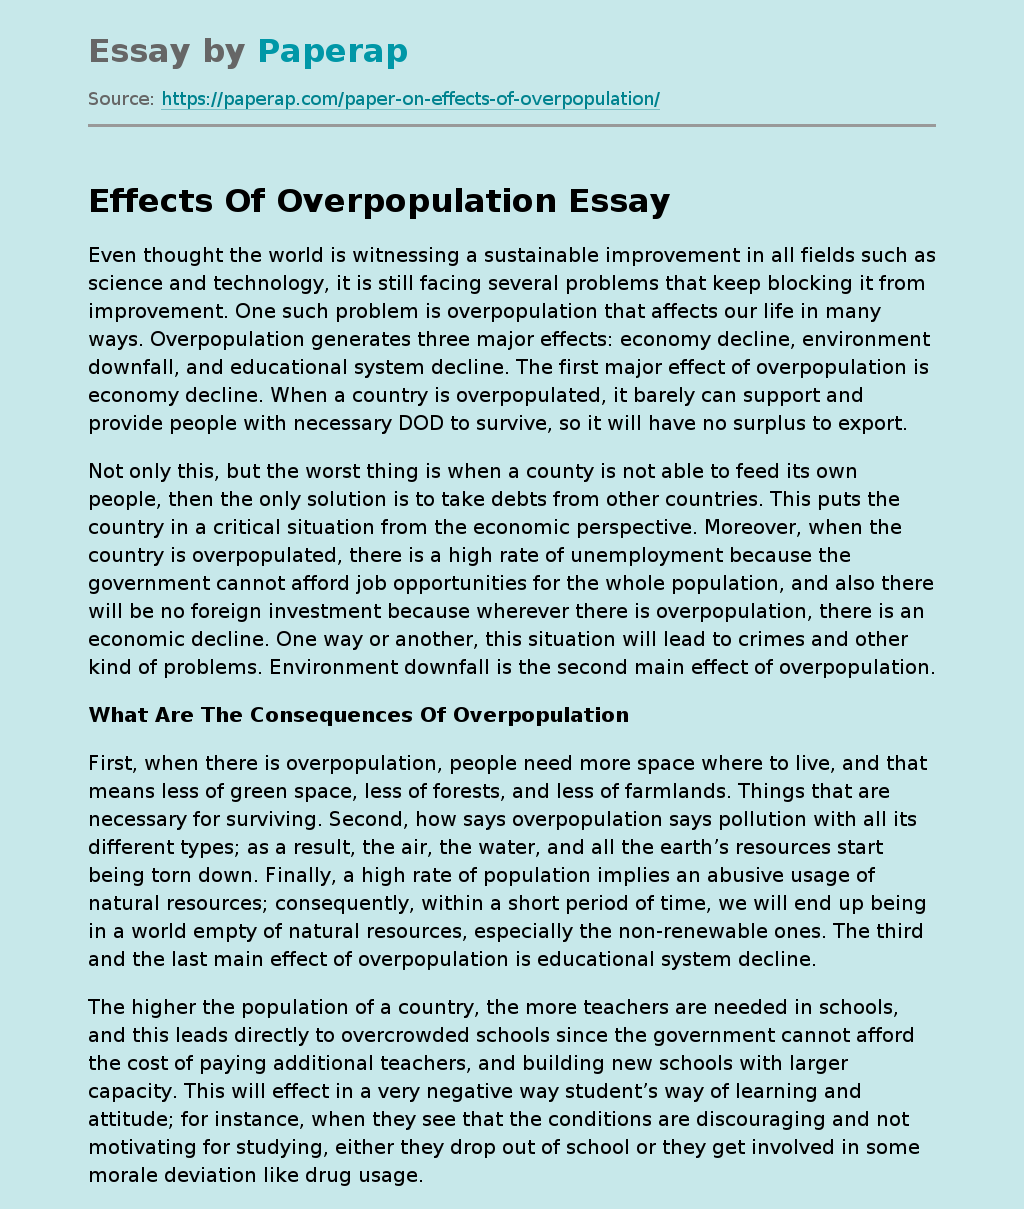 Effects Of Overpopulation